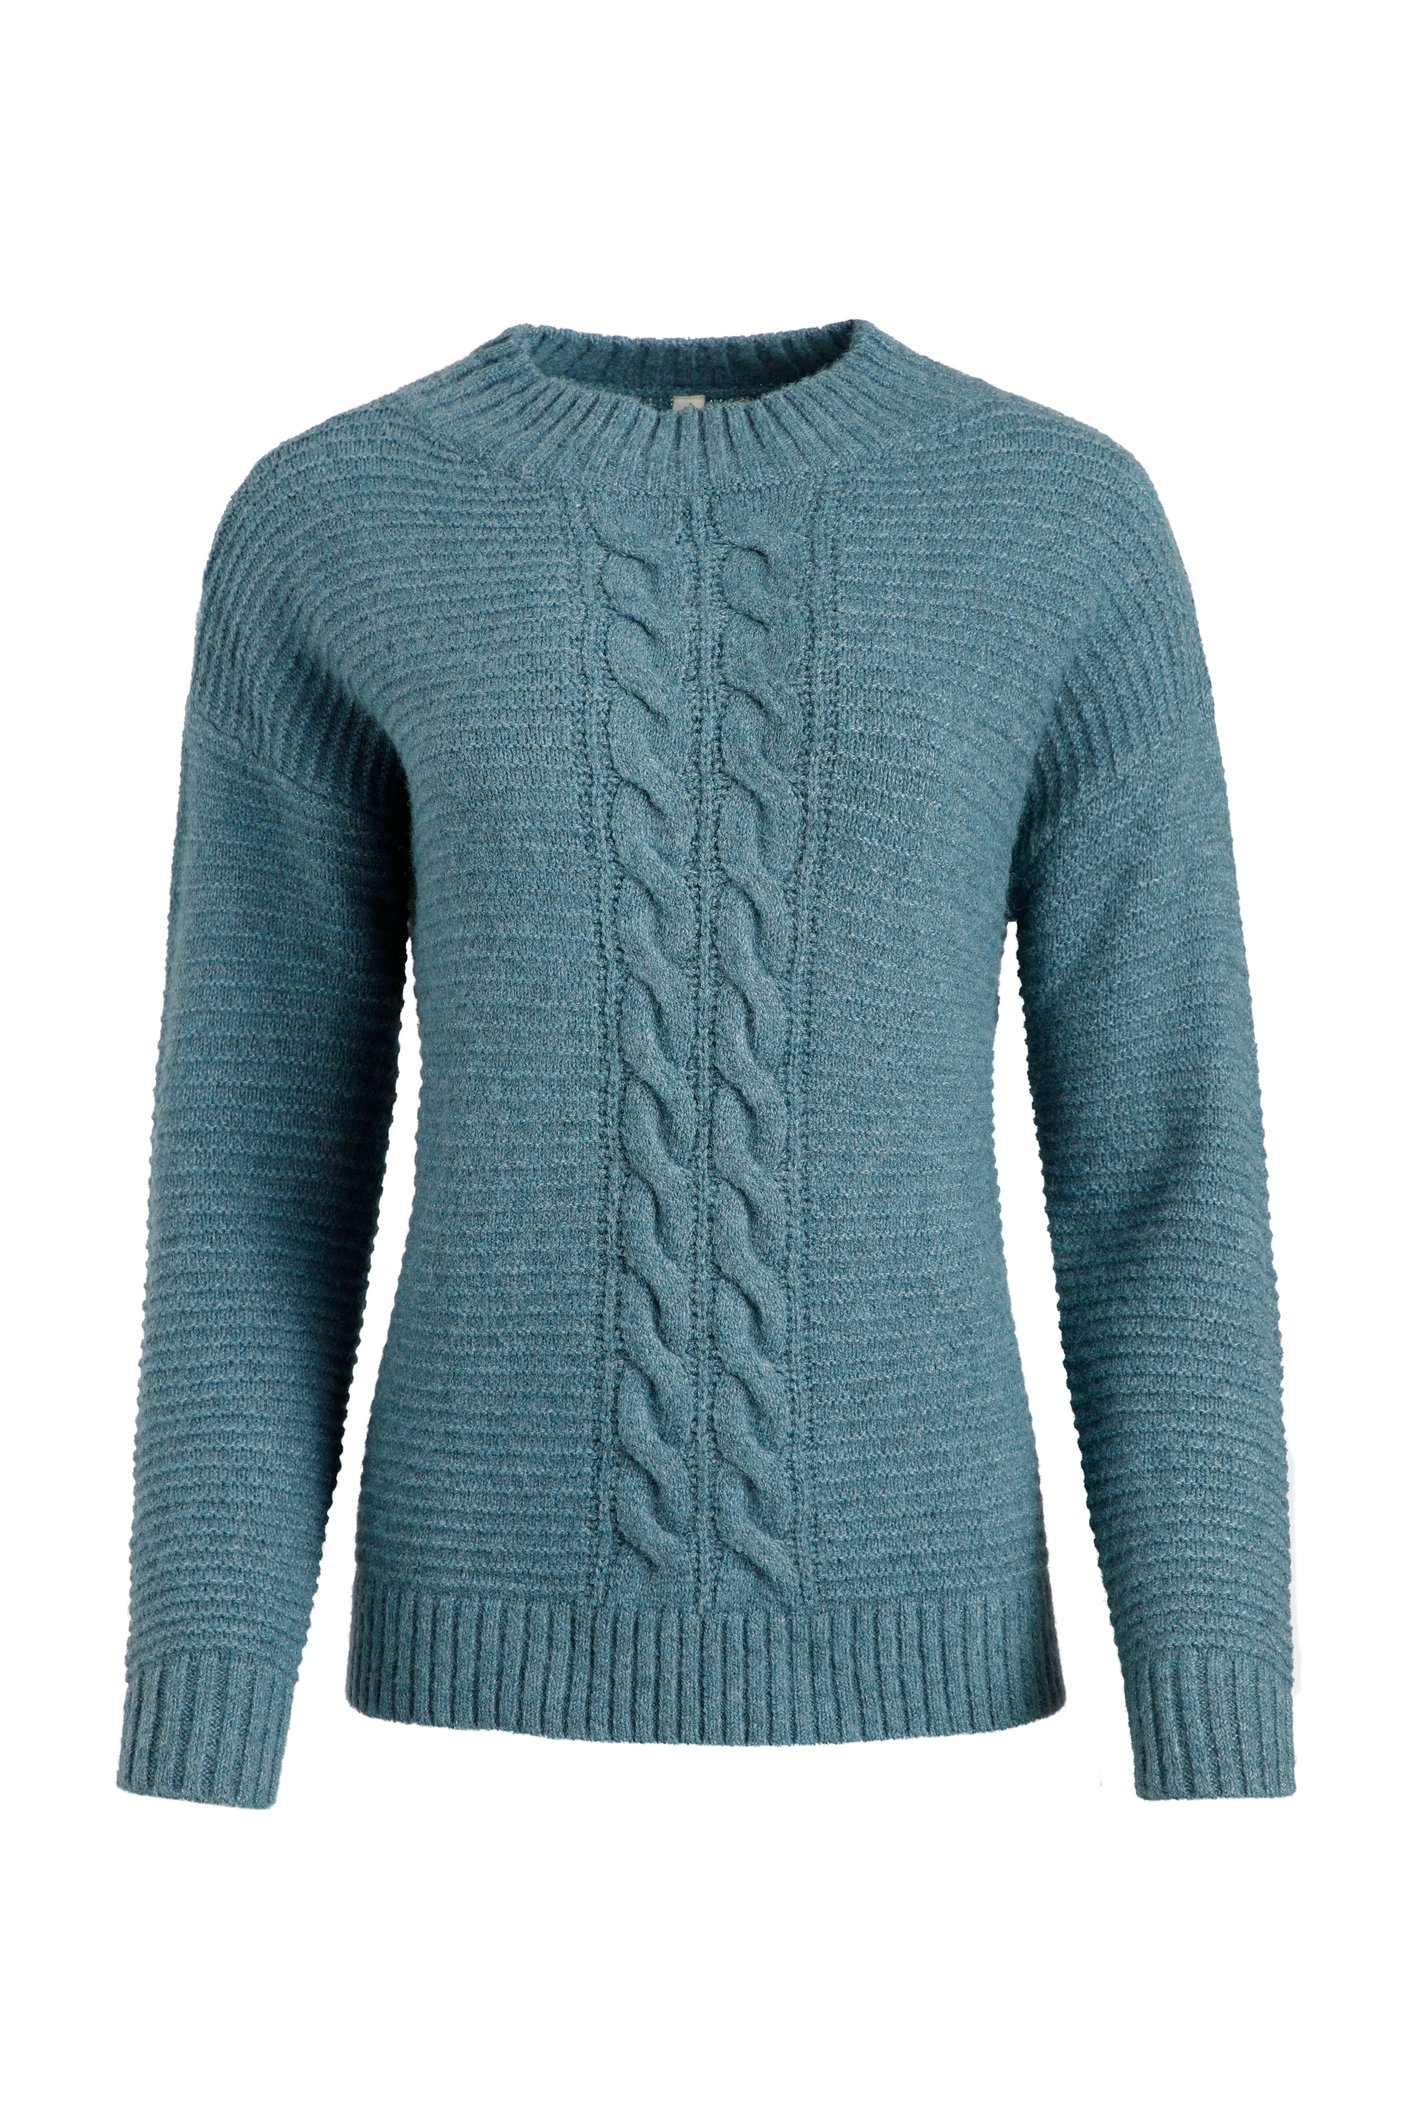 Weird Fish Ilavia Cable Knit Jumper Stone Blue Size 18